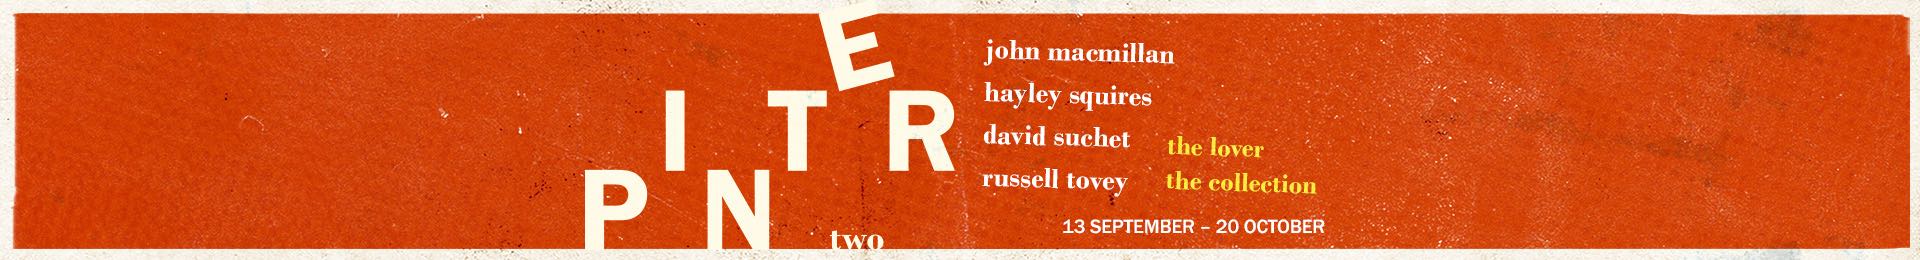 Pinter 2: The Lover/The Collection banner image